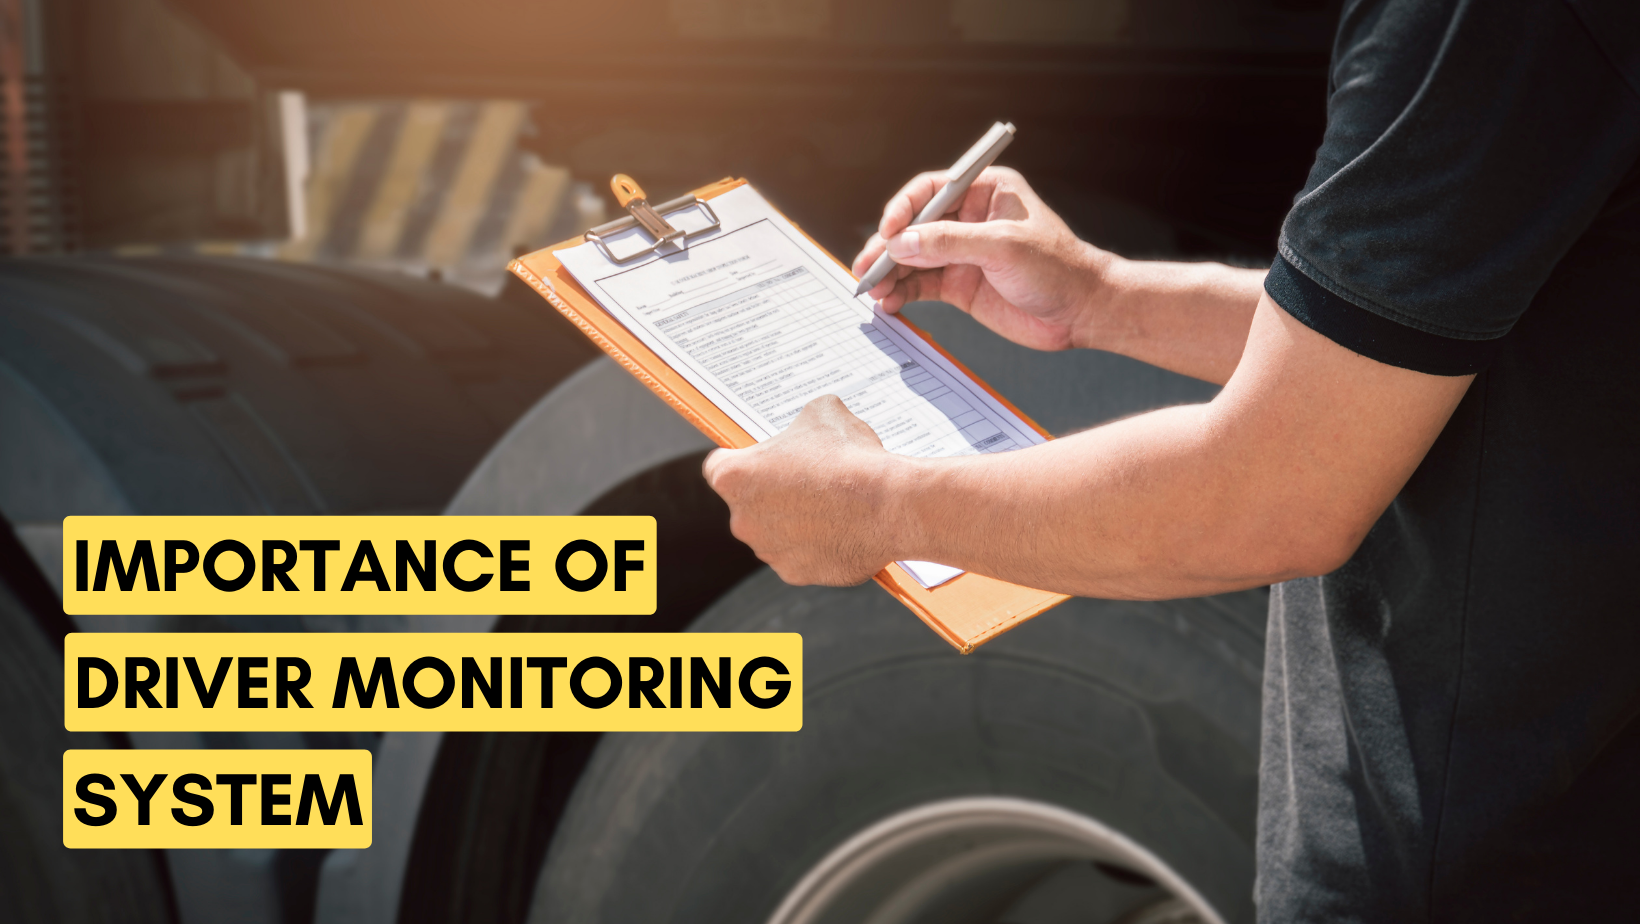 Importance of Driver Monitoring System